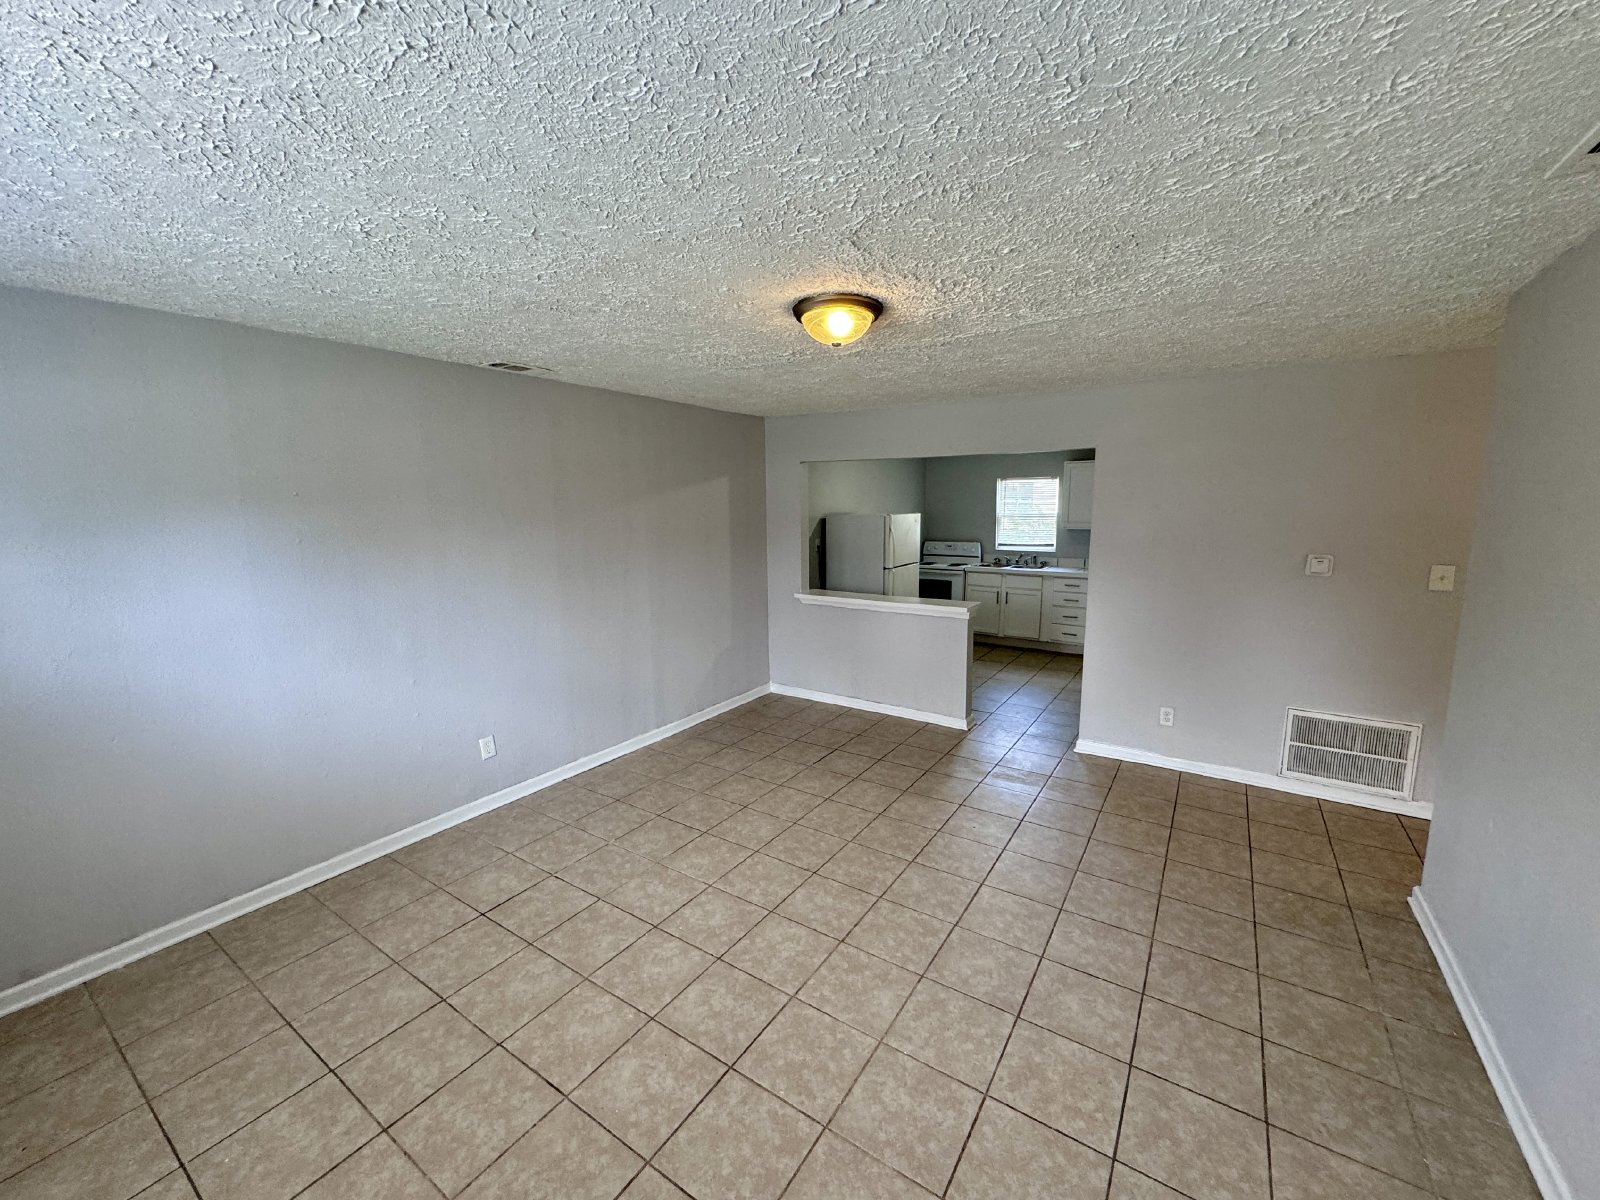 2227 Ct-2 Bed/1 Bath Duplex - Recently Renovated & Move in Ready property image